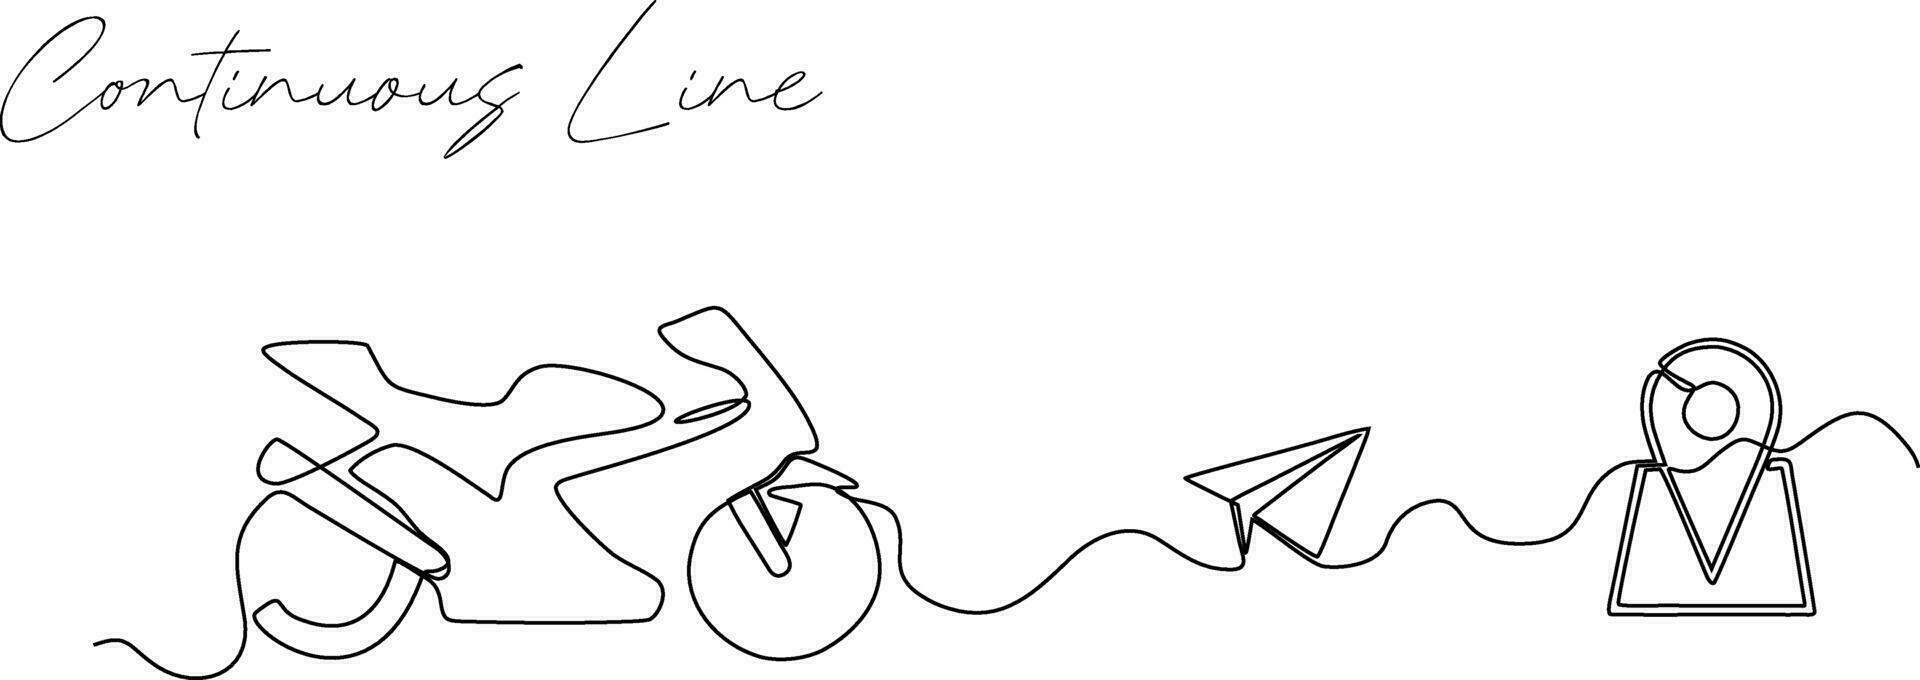 continuous line illustration of motorbike going to location vector